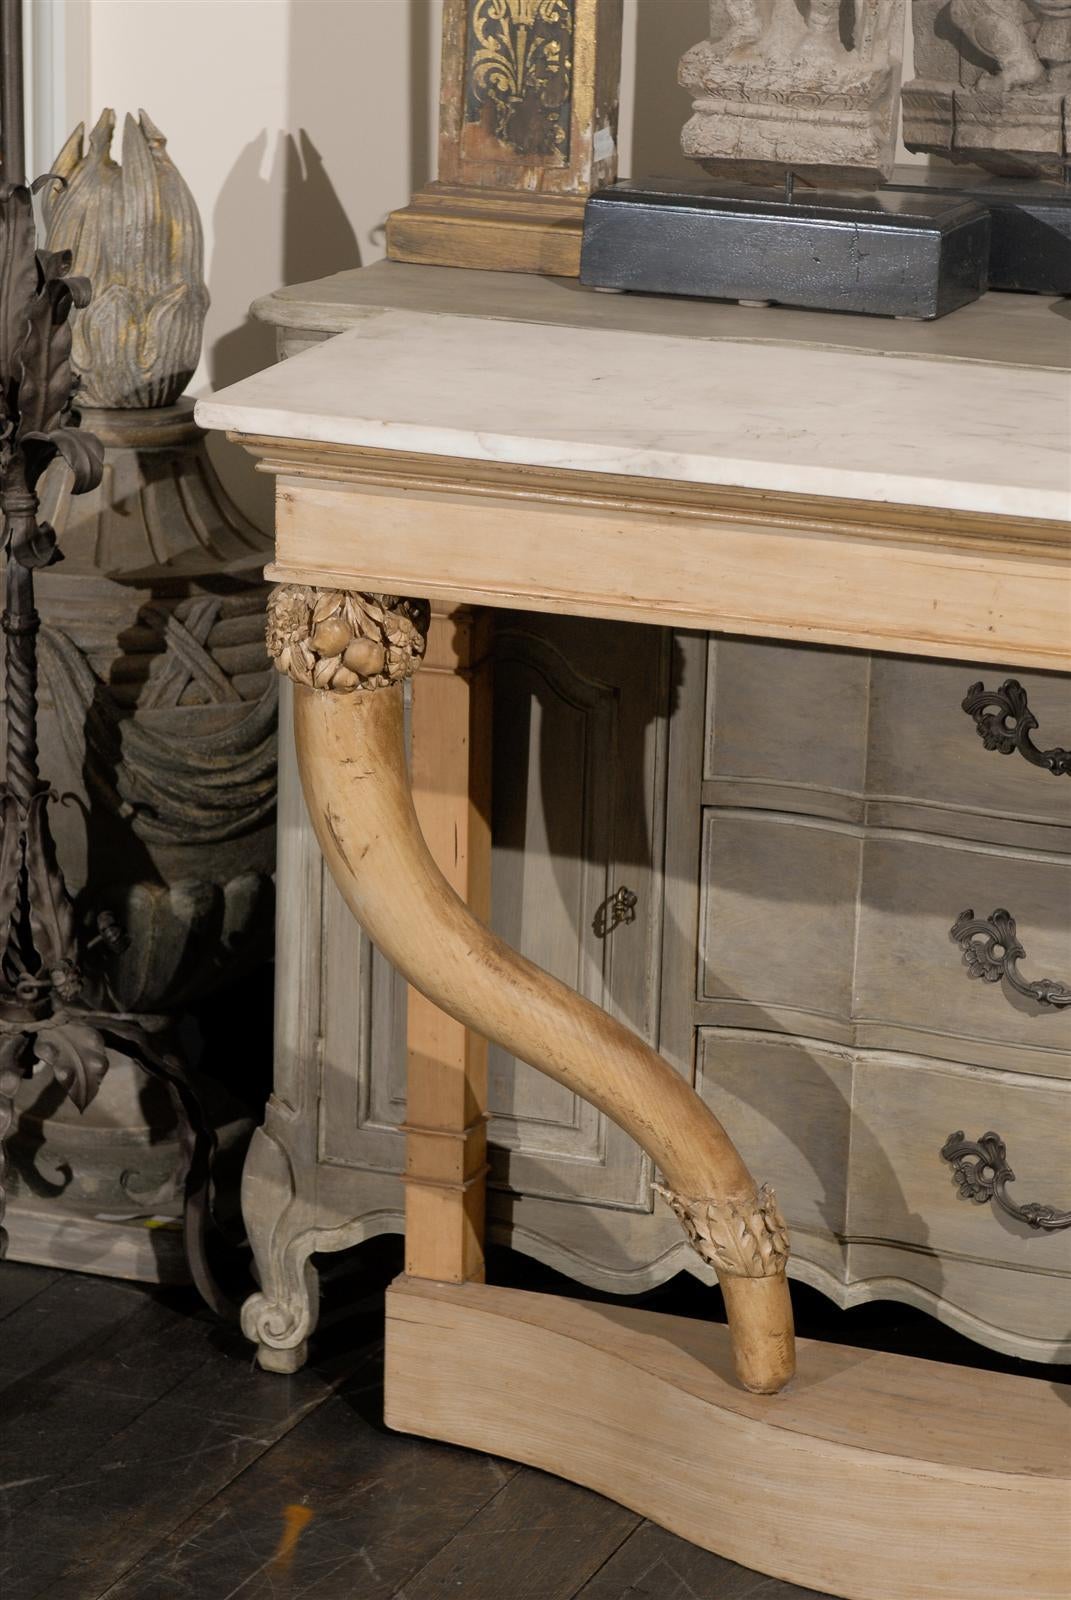 20th Century White Carrara Marble-Top Carved Wood Console Table with Cornucopia Legs